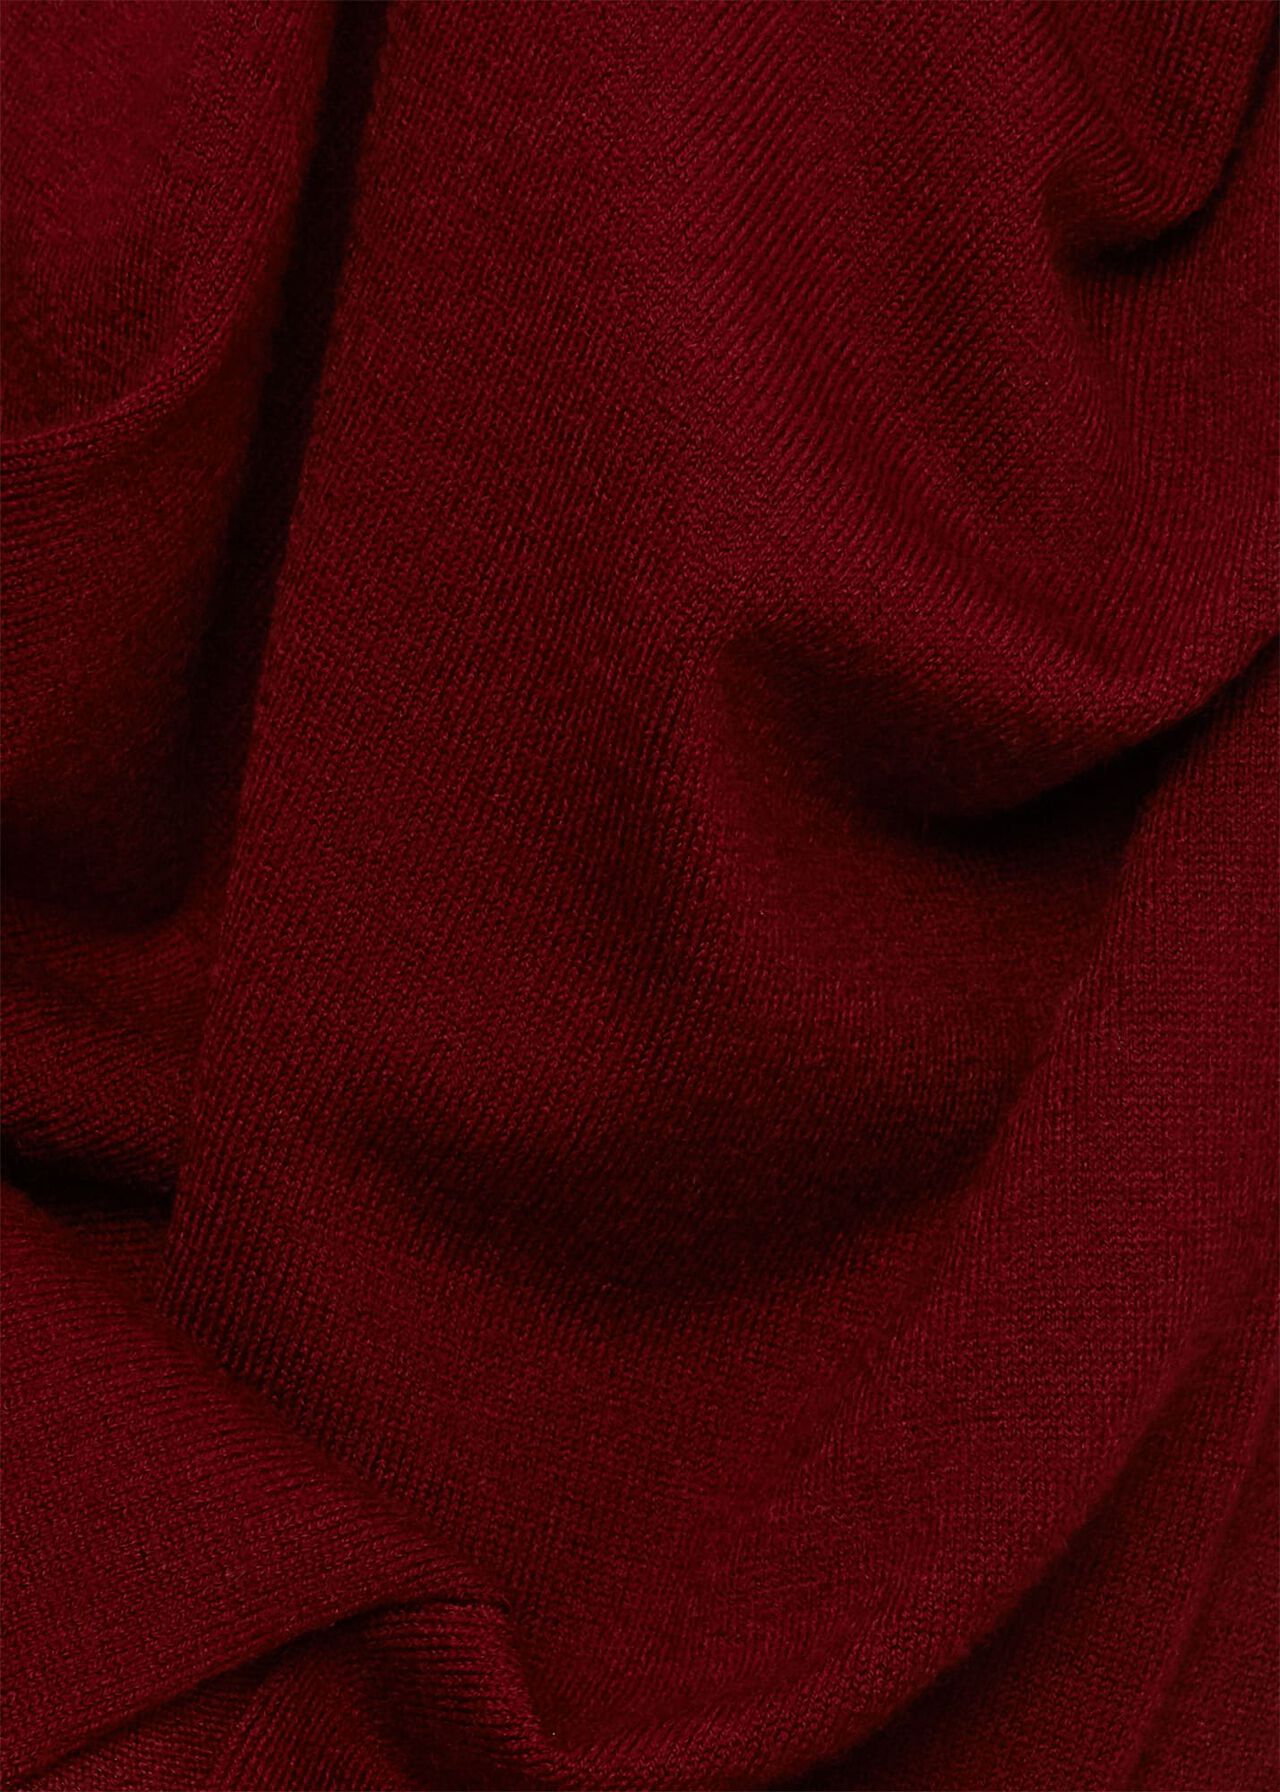 Calla Knitted Dress, Wine Red, hi-res